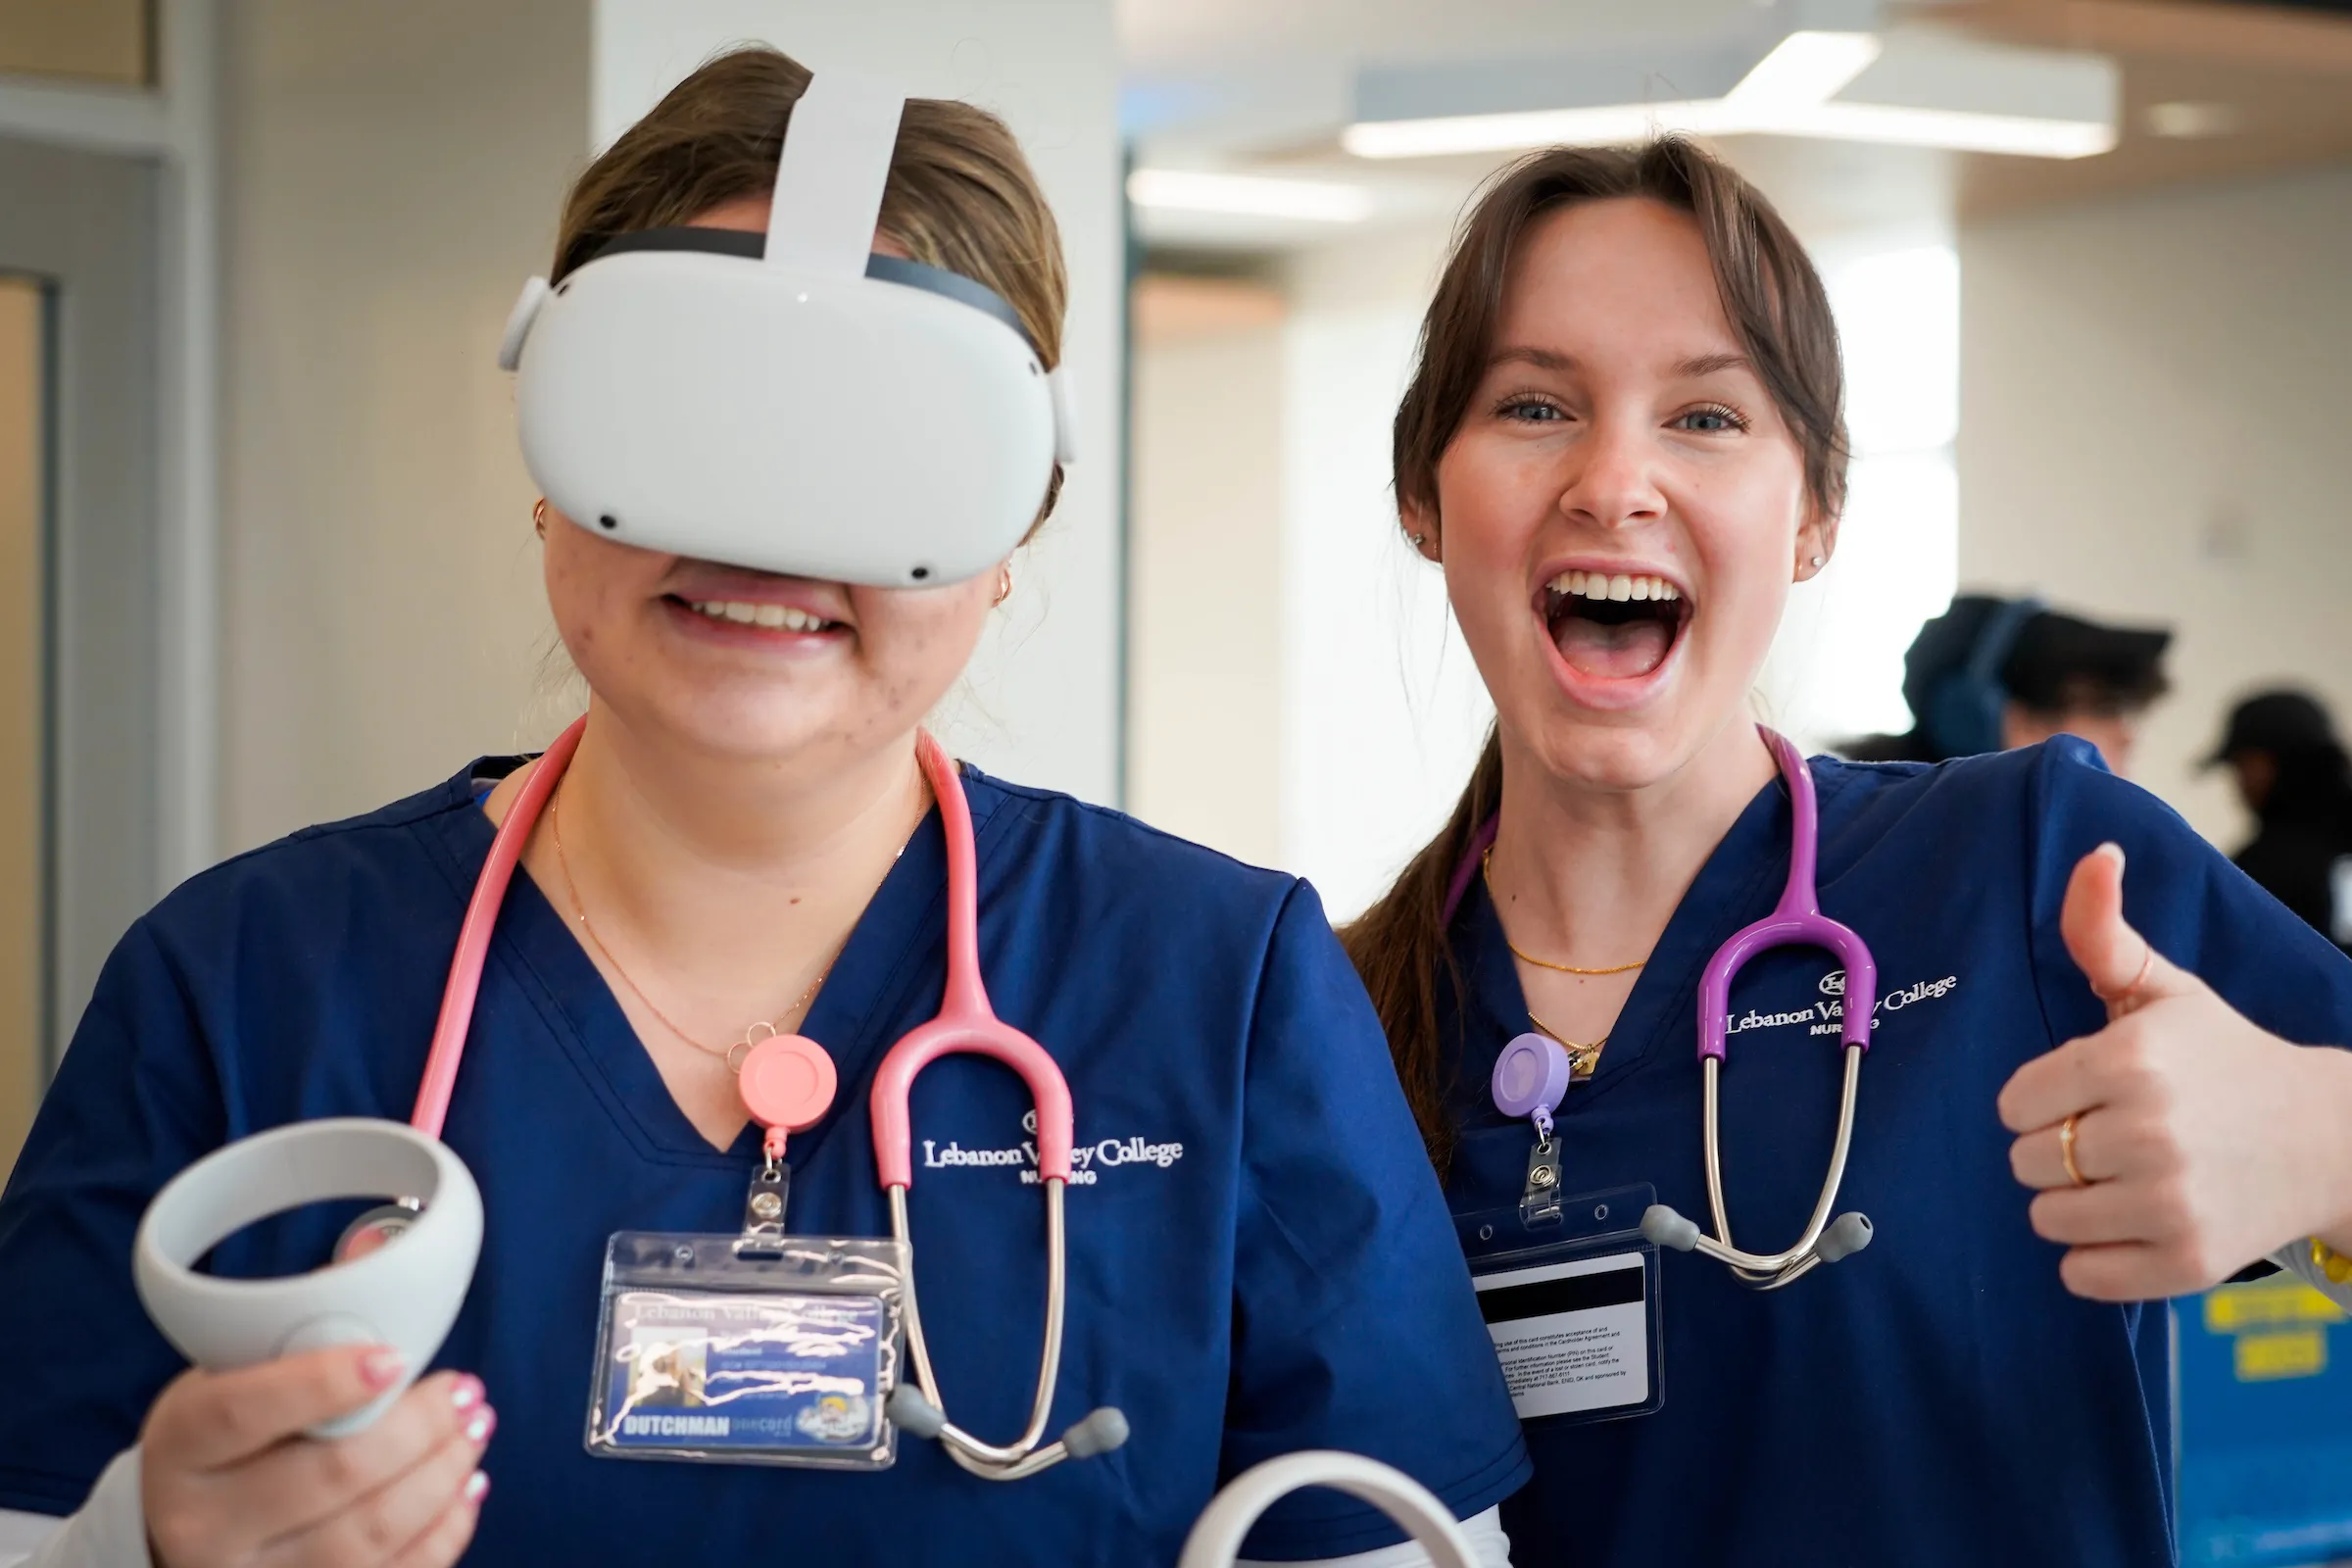 LVC nursing students use VR technology at admitted student event